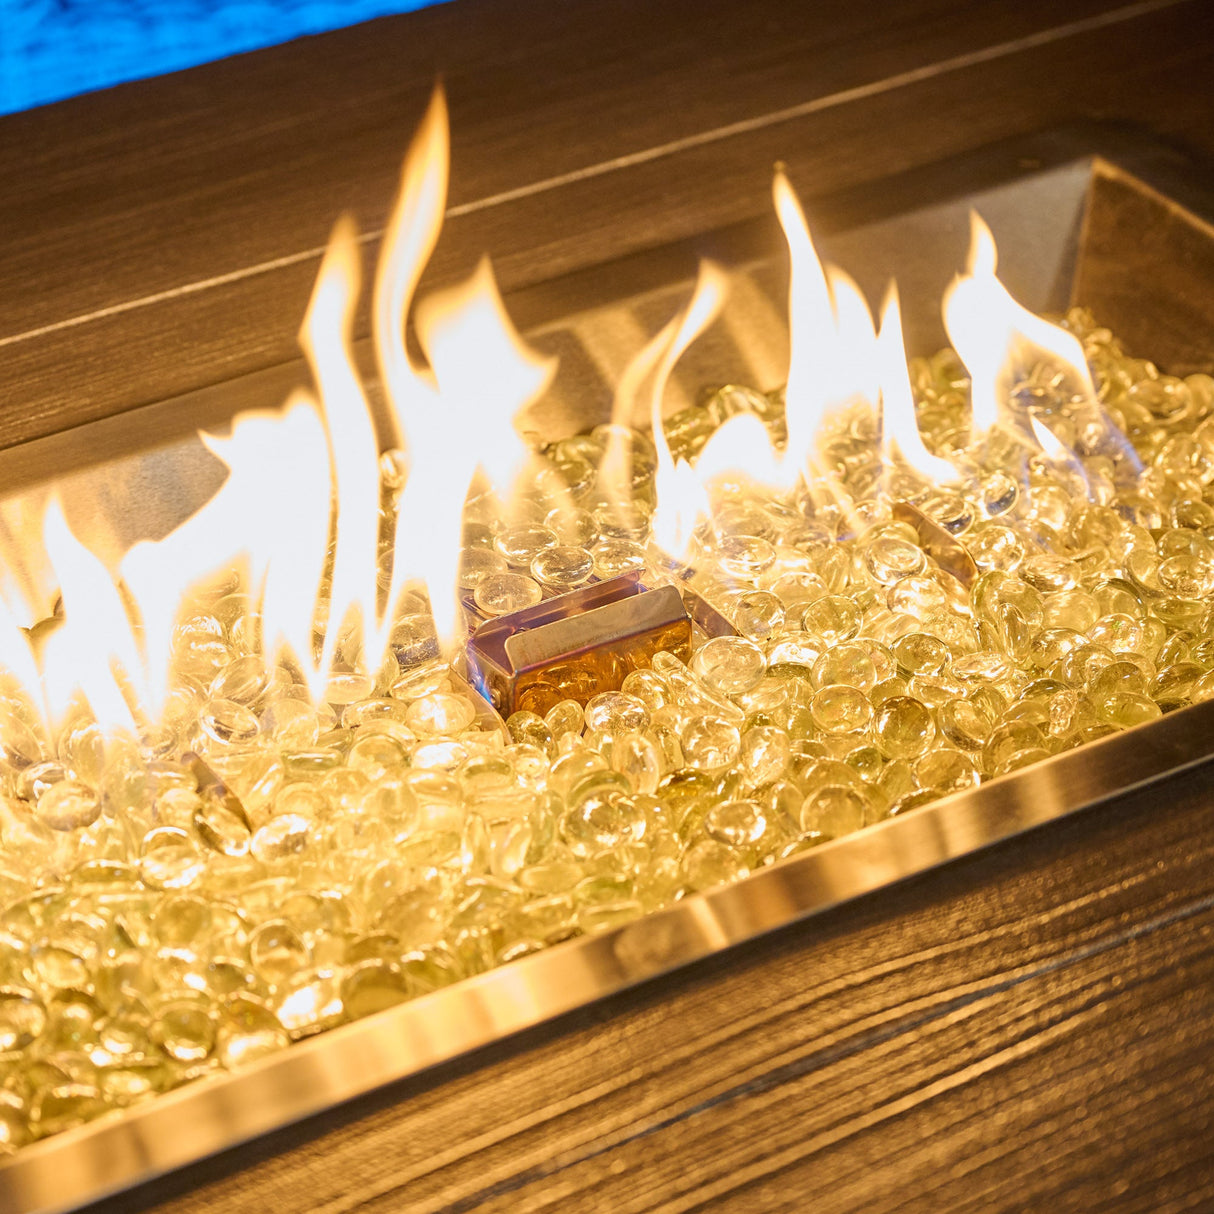 A close up of the flame coming from the burner of a Havenwood Rectangular Gas Fire Pit Table